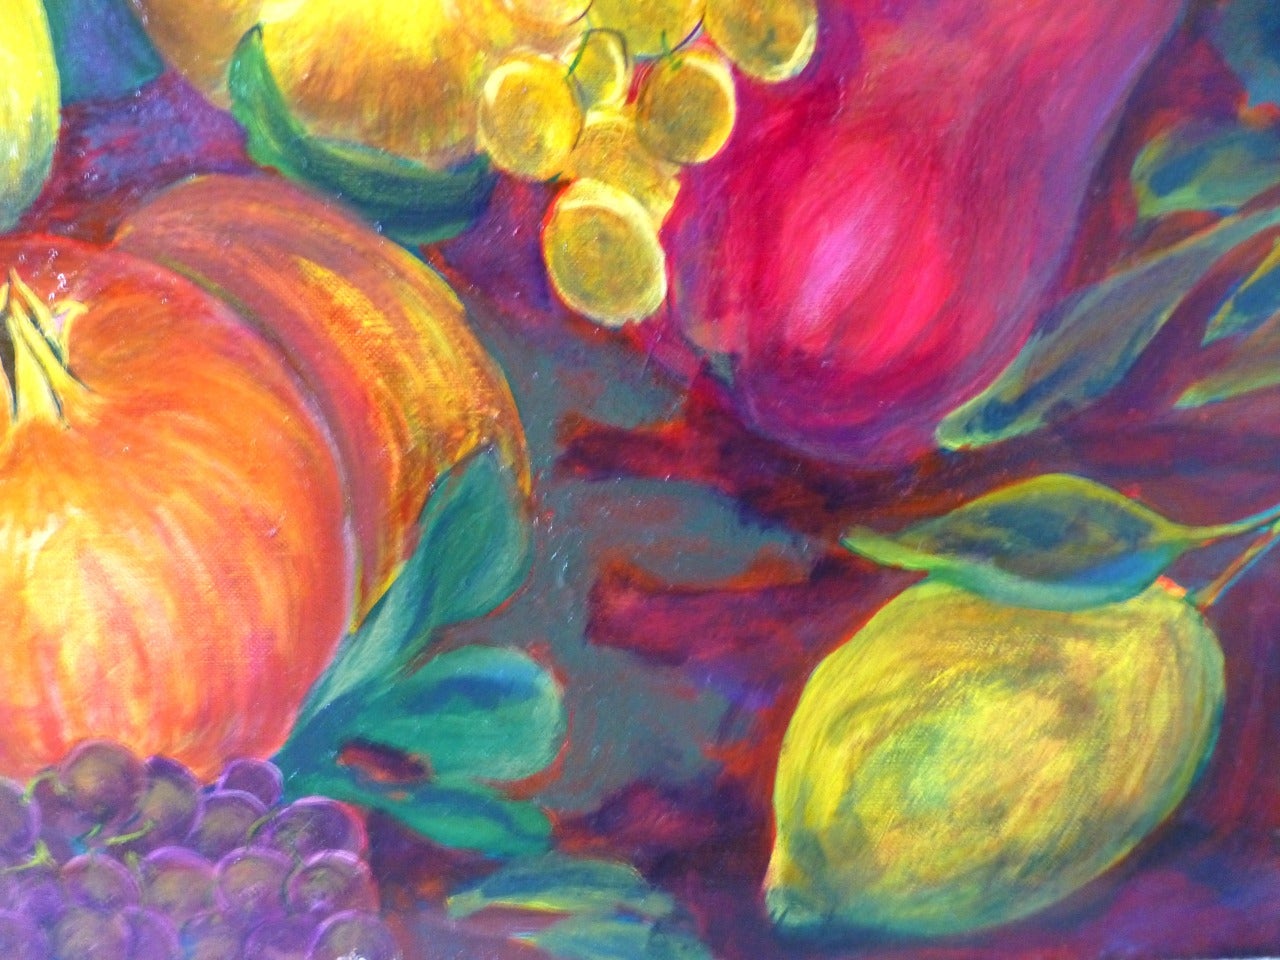 Provence is a painting made by Evelyne Ballestra, a French contemporary artist. This painting of fruits and vegetables is a declination from a flower series, defined by their distinct bright colors, satiny, silky, vibrating materials and form. The